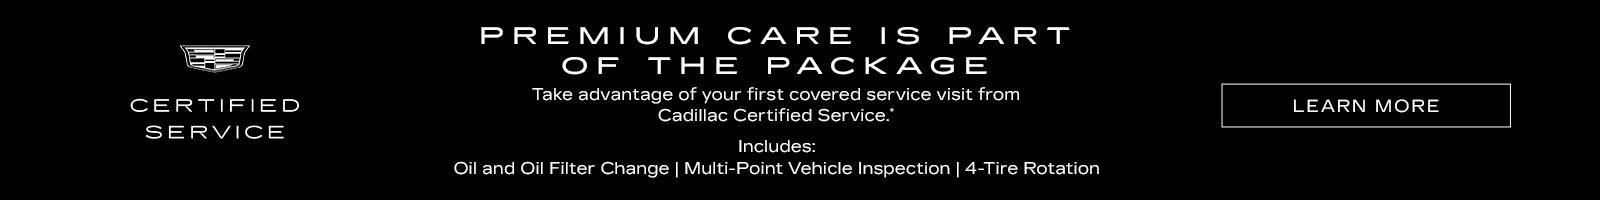 Premium Care Is Part Of The Package